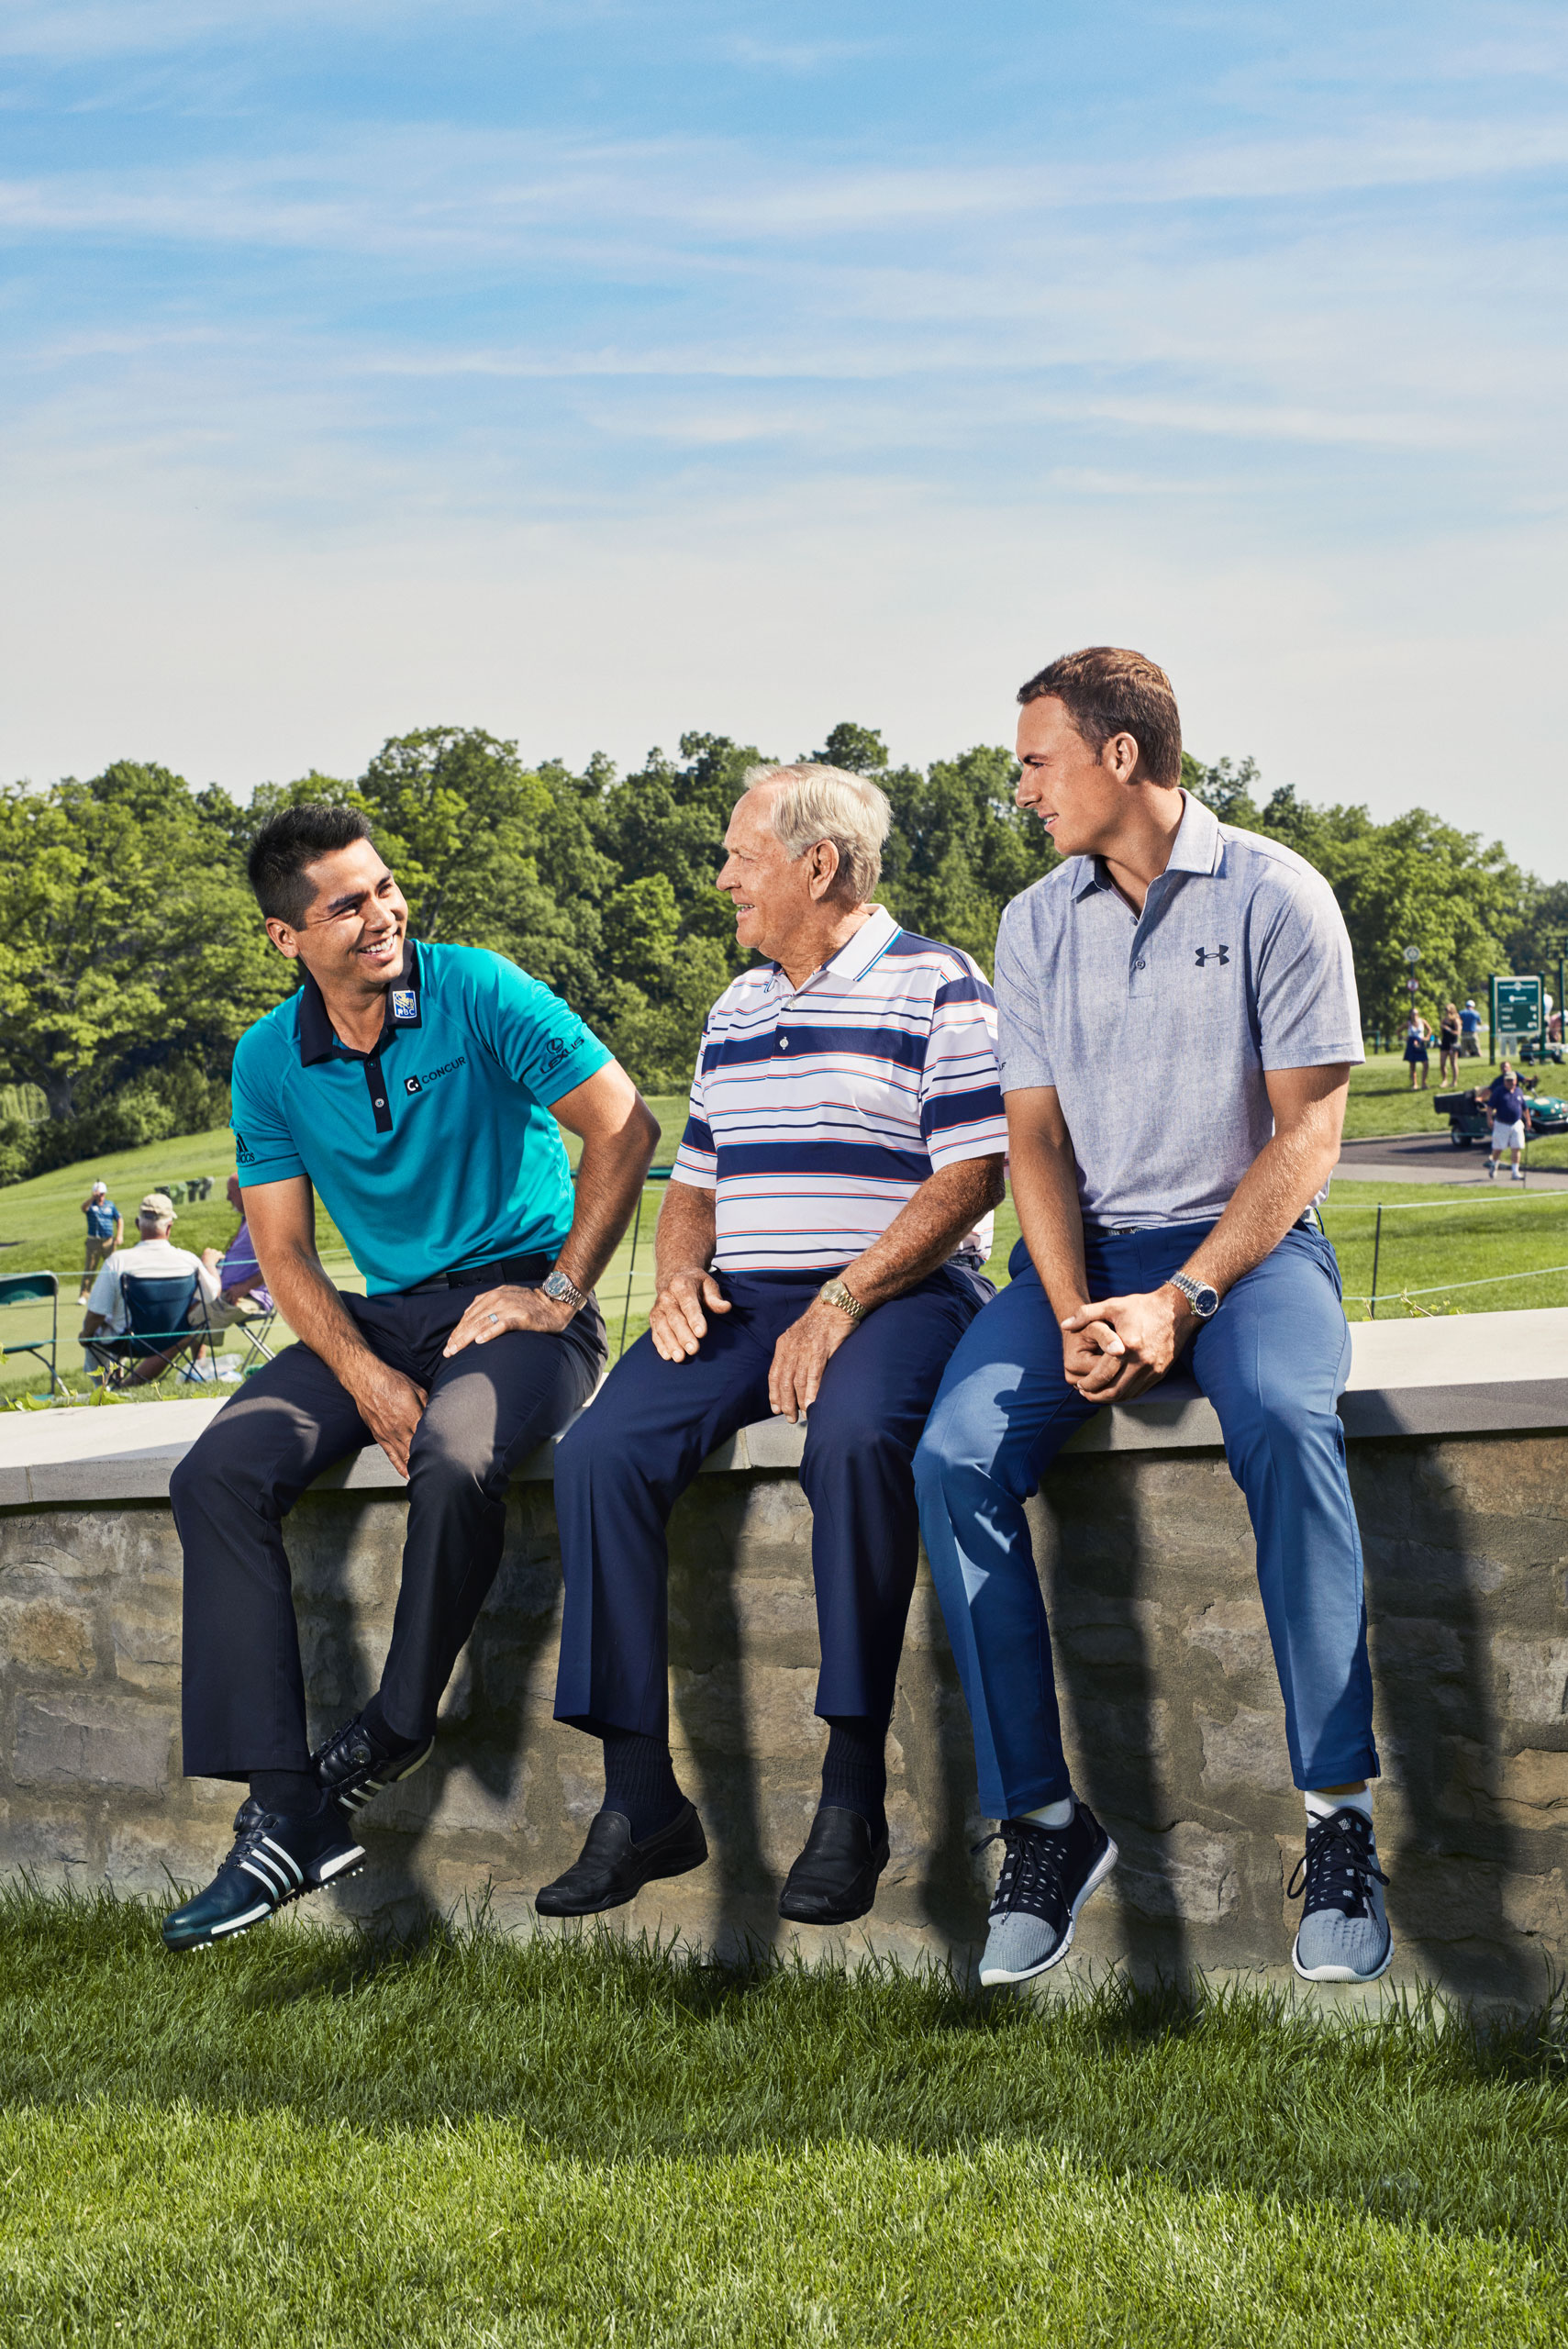 From left: Day, Nicklaus and Spieth banter during practice rounds at the Memorial Tournament in Ohio